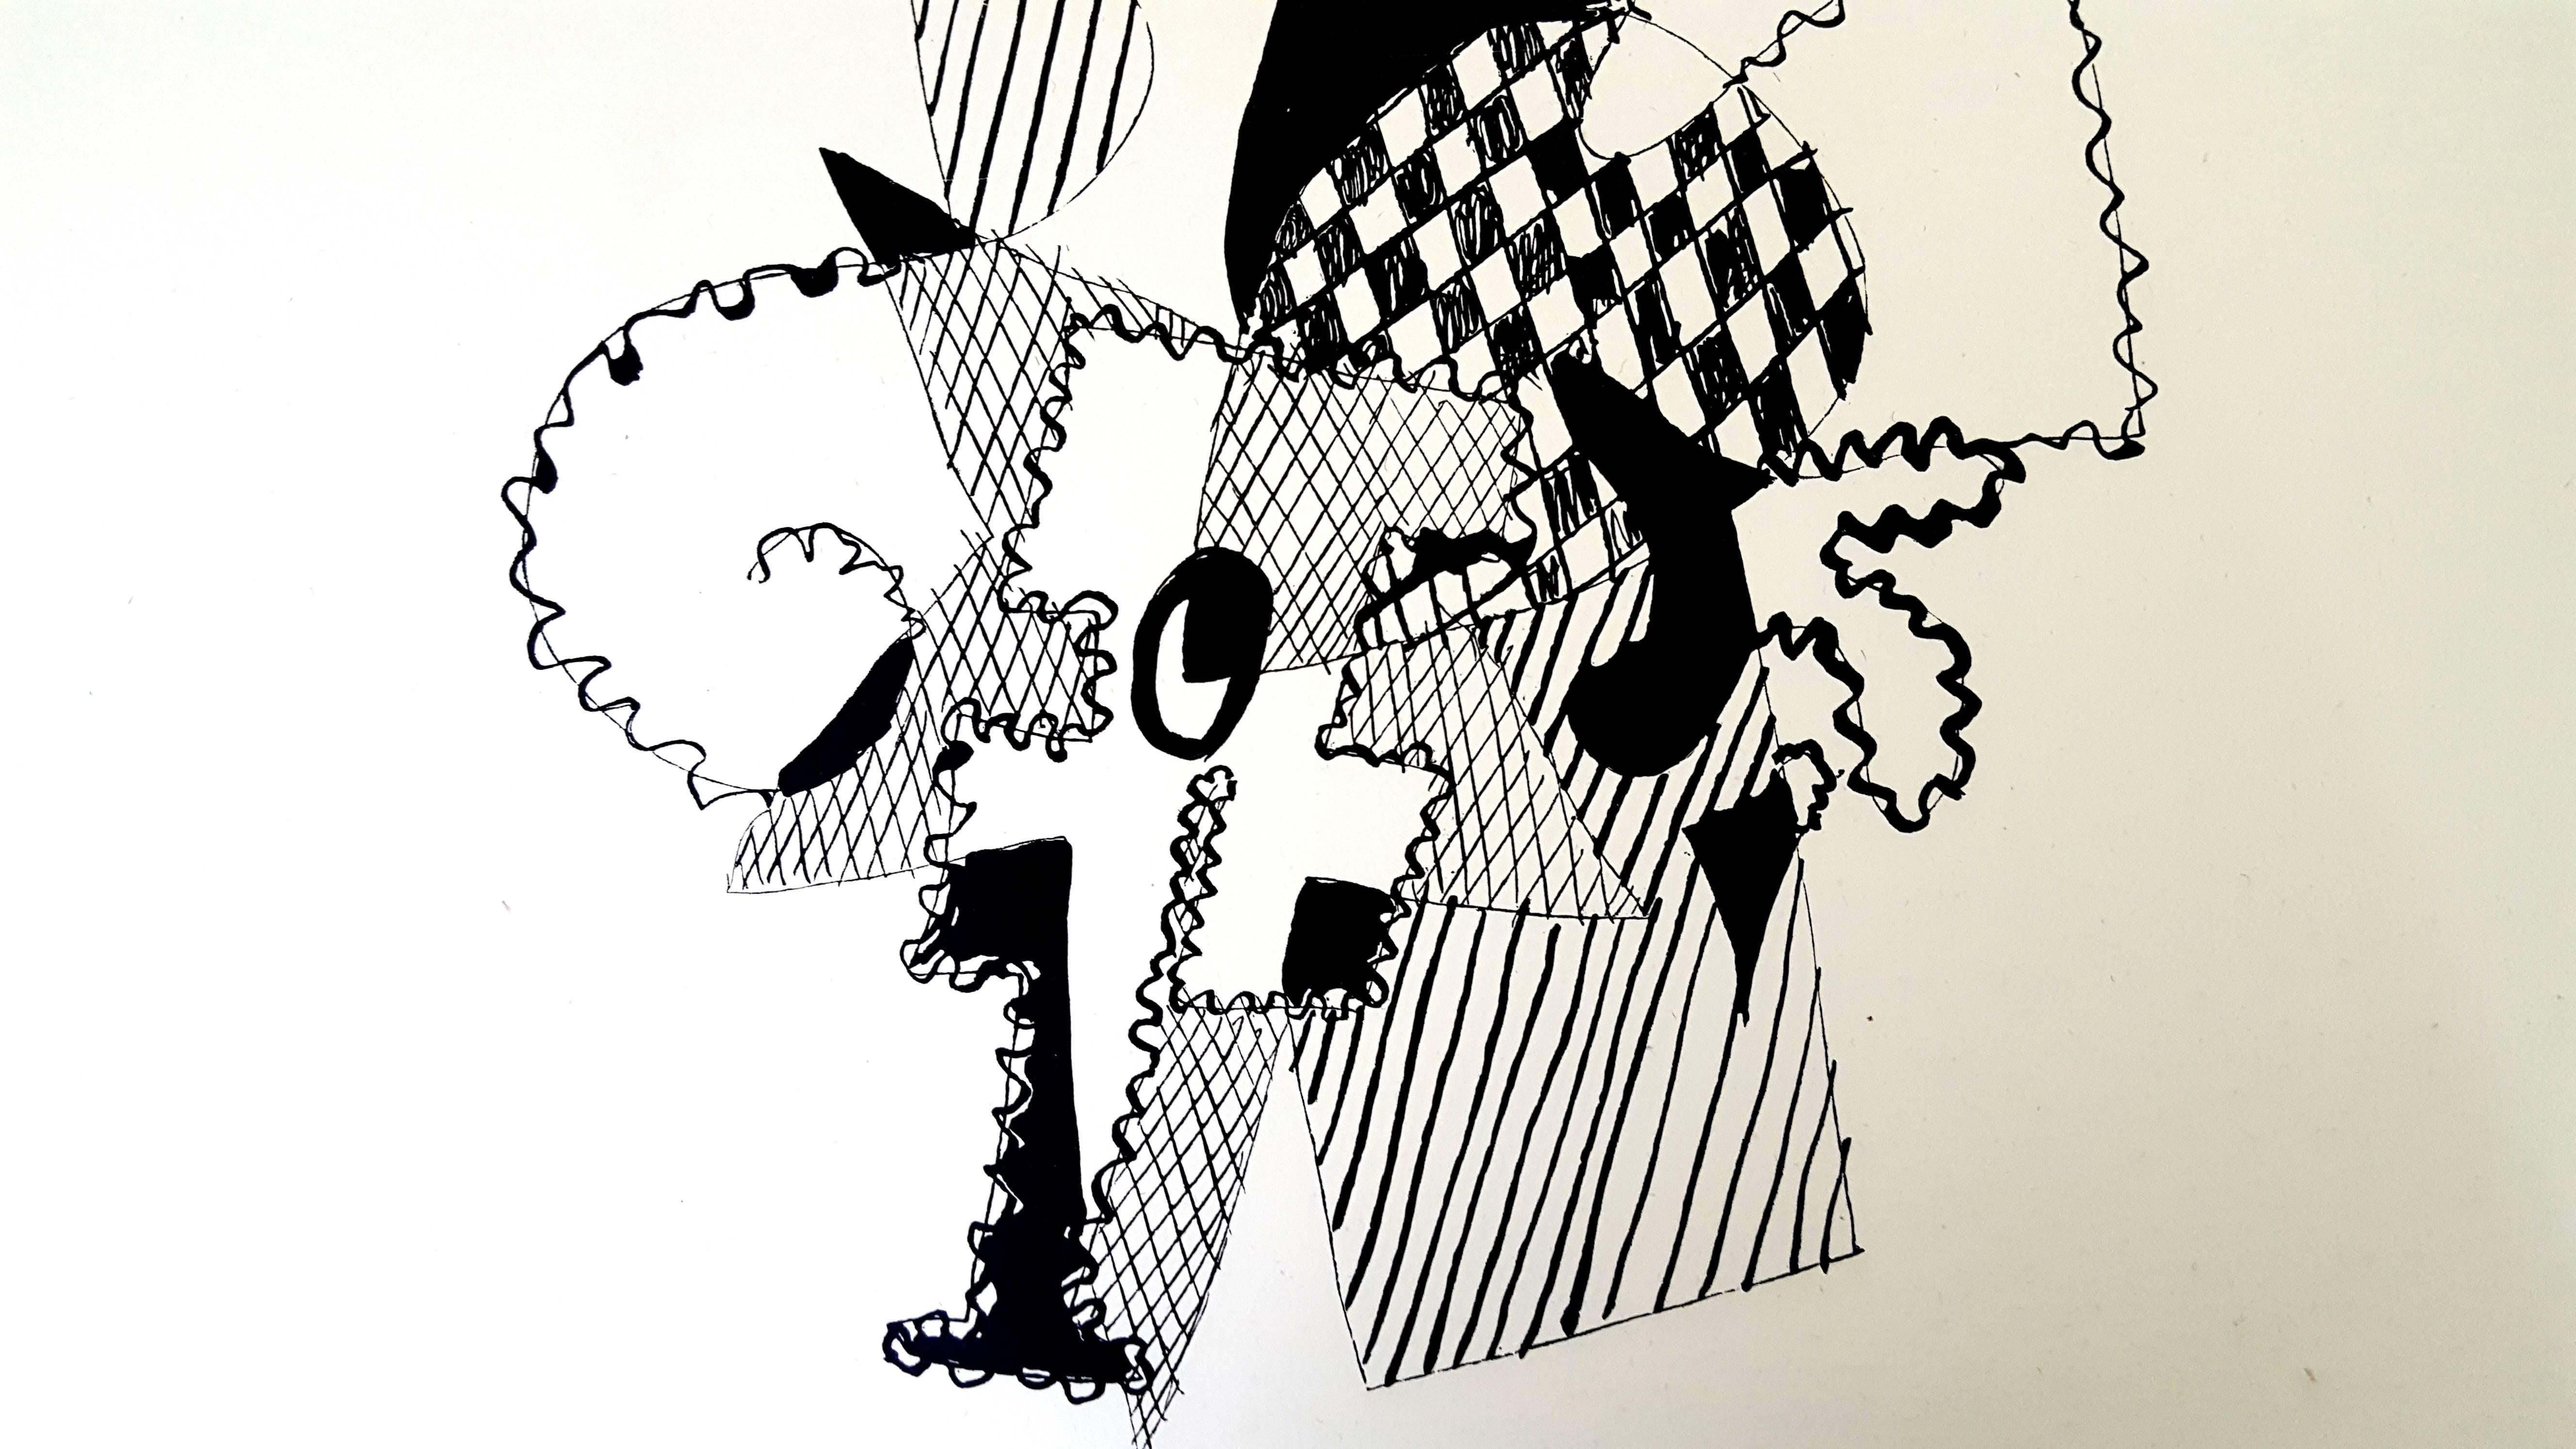 Pablo Picasso (after) Helene Chez Archimede - Wood Engraving - Cubist Print by (after) Pablo Picasso